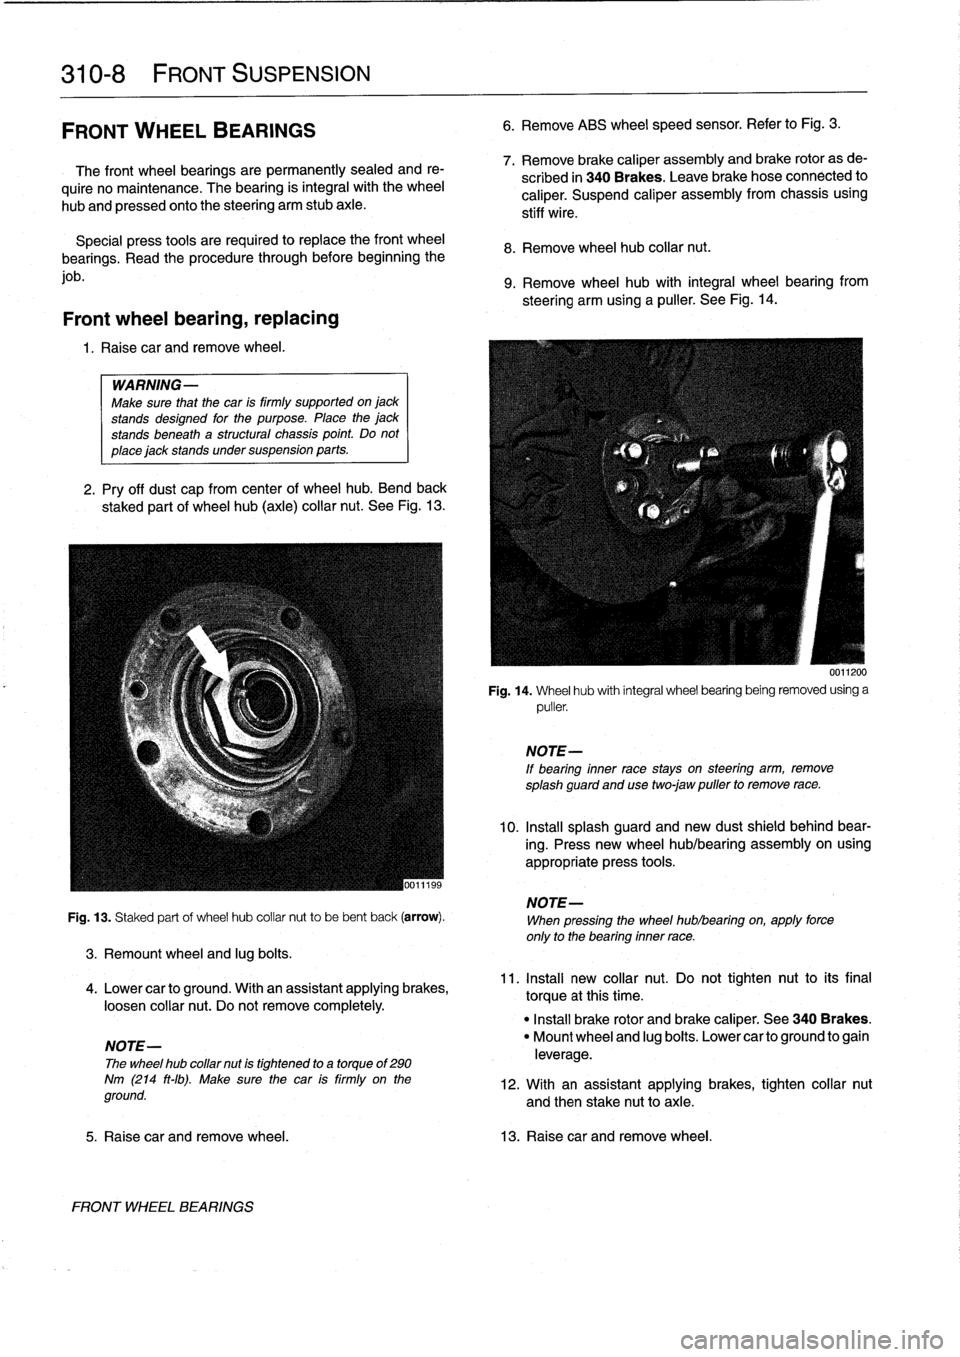 BMW 318i 1997 E36 Workshop Manual 
310-
8

	

FRONT
SUSPENSION

FRONT
WHEEL
BEARINGS

The
front
wheel
bearings
are
permanently
sealed
and
re-

quire
no
maintenance
.
The
bearing
is
integral
with
the
wheel

hub
and
pressed
onto
the
ste